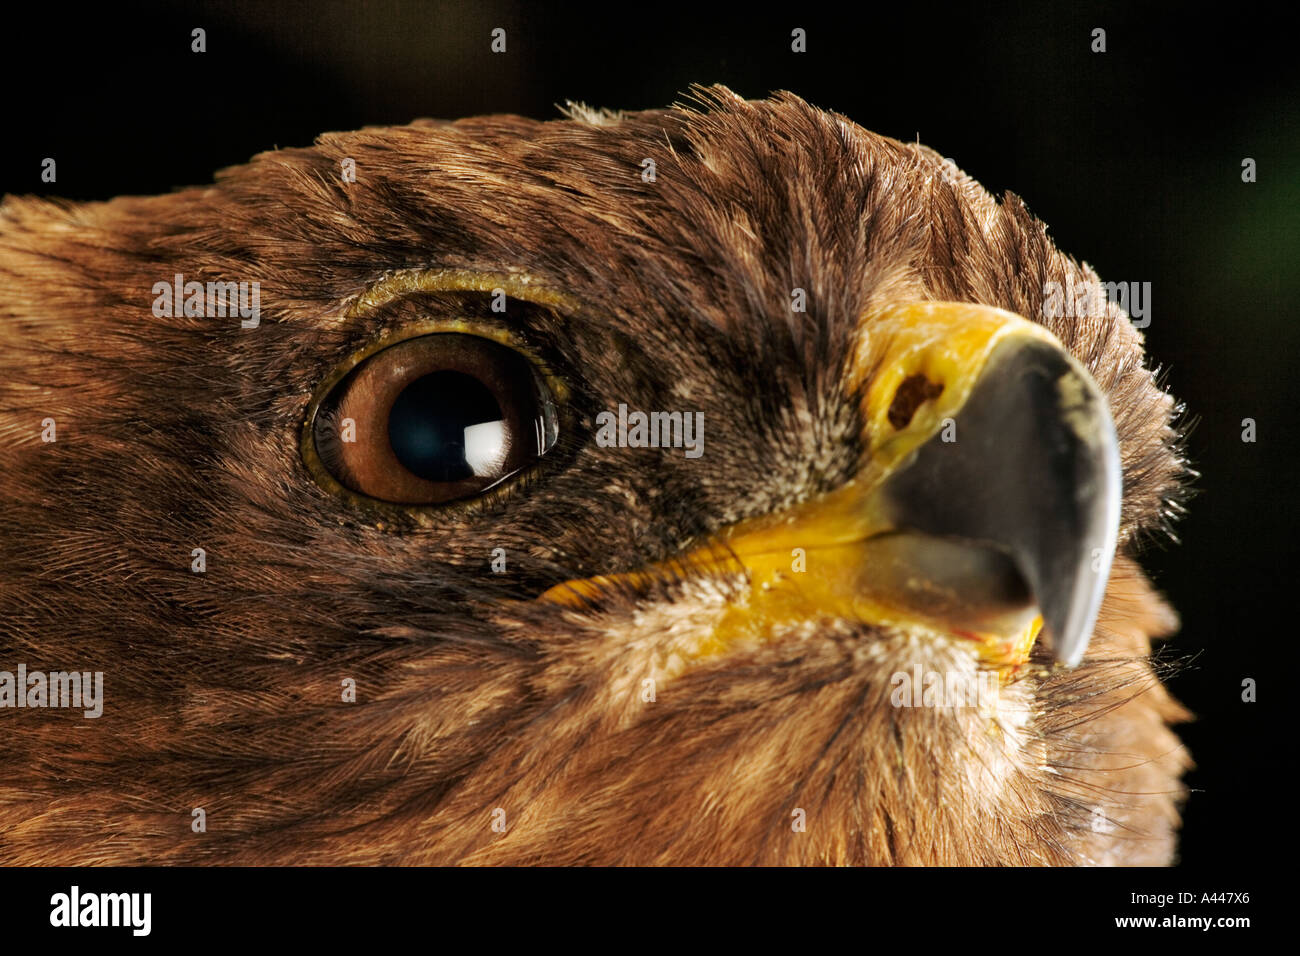 Wahlbergs Eagle Aquila wahlbergi Large bird of prey found in Africa Stock Photo